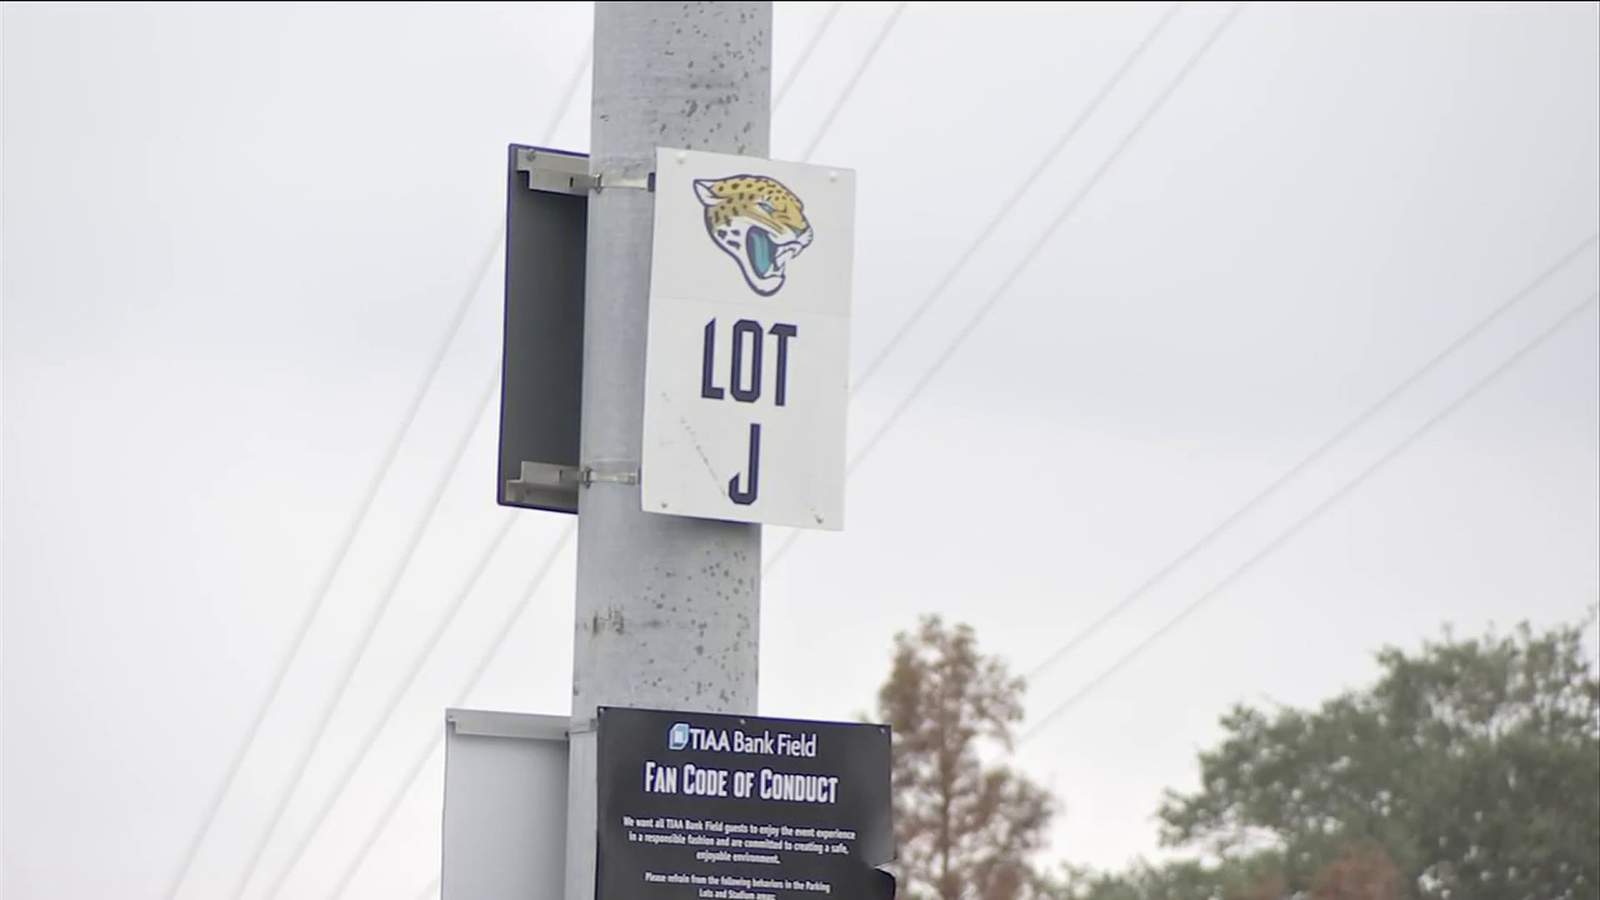 Councilman calls for another $41 million for city improvements on top of Lot J money